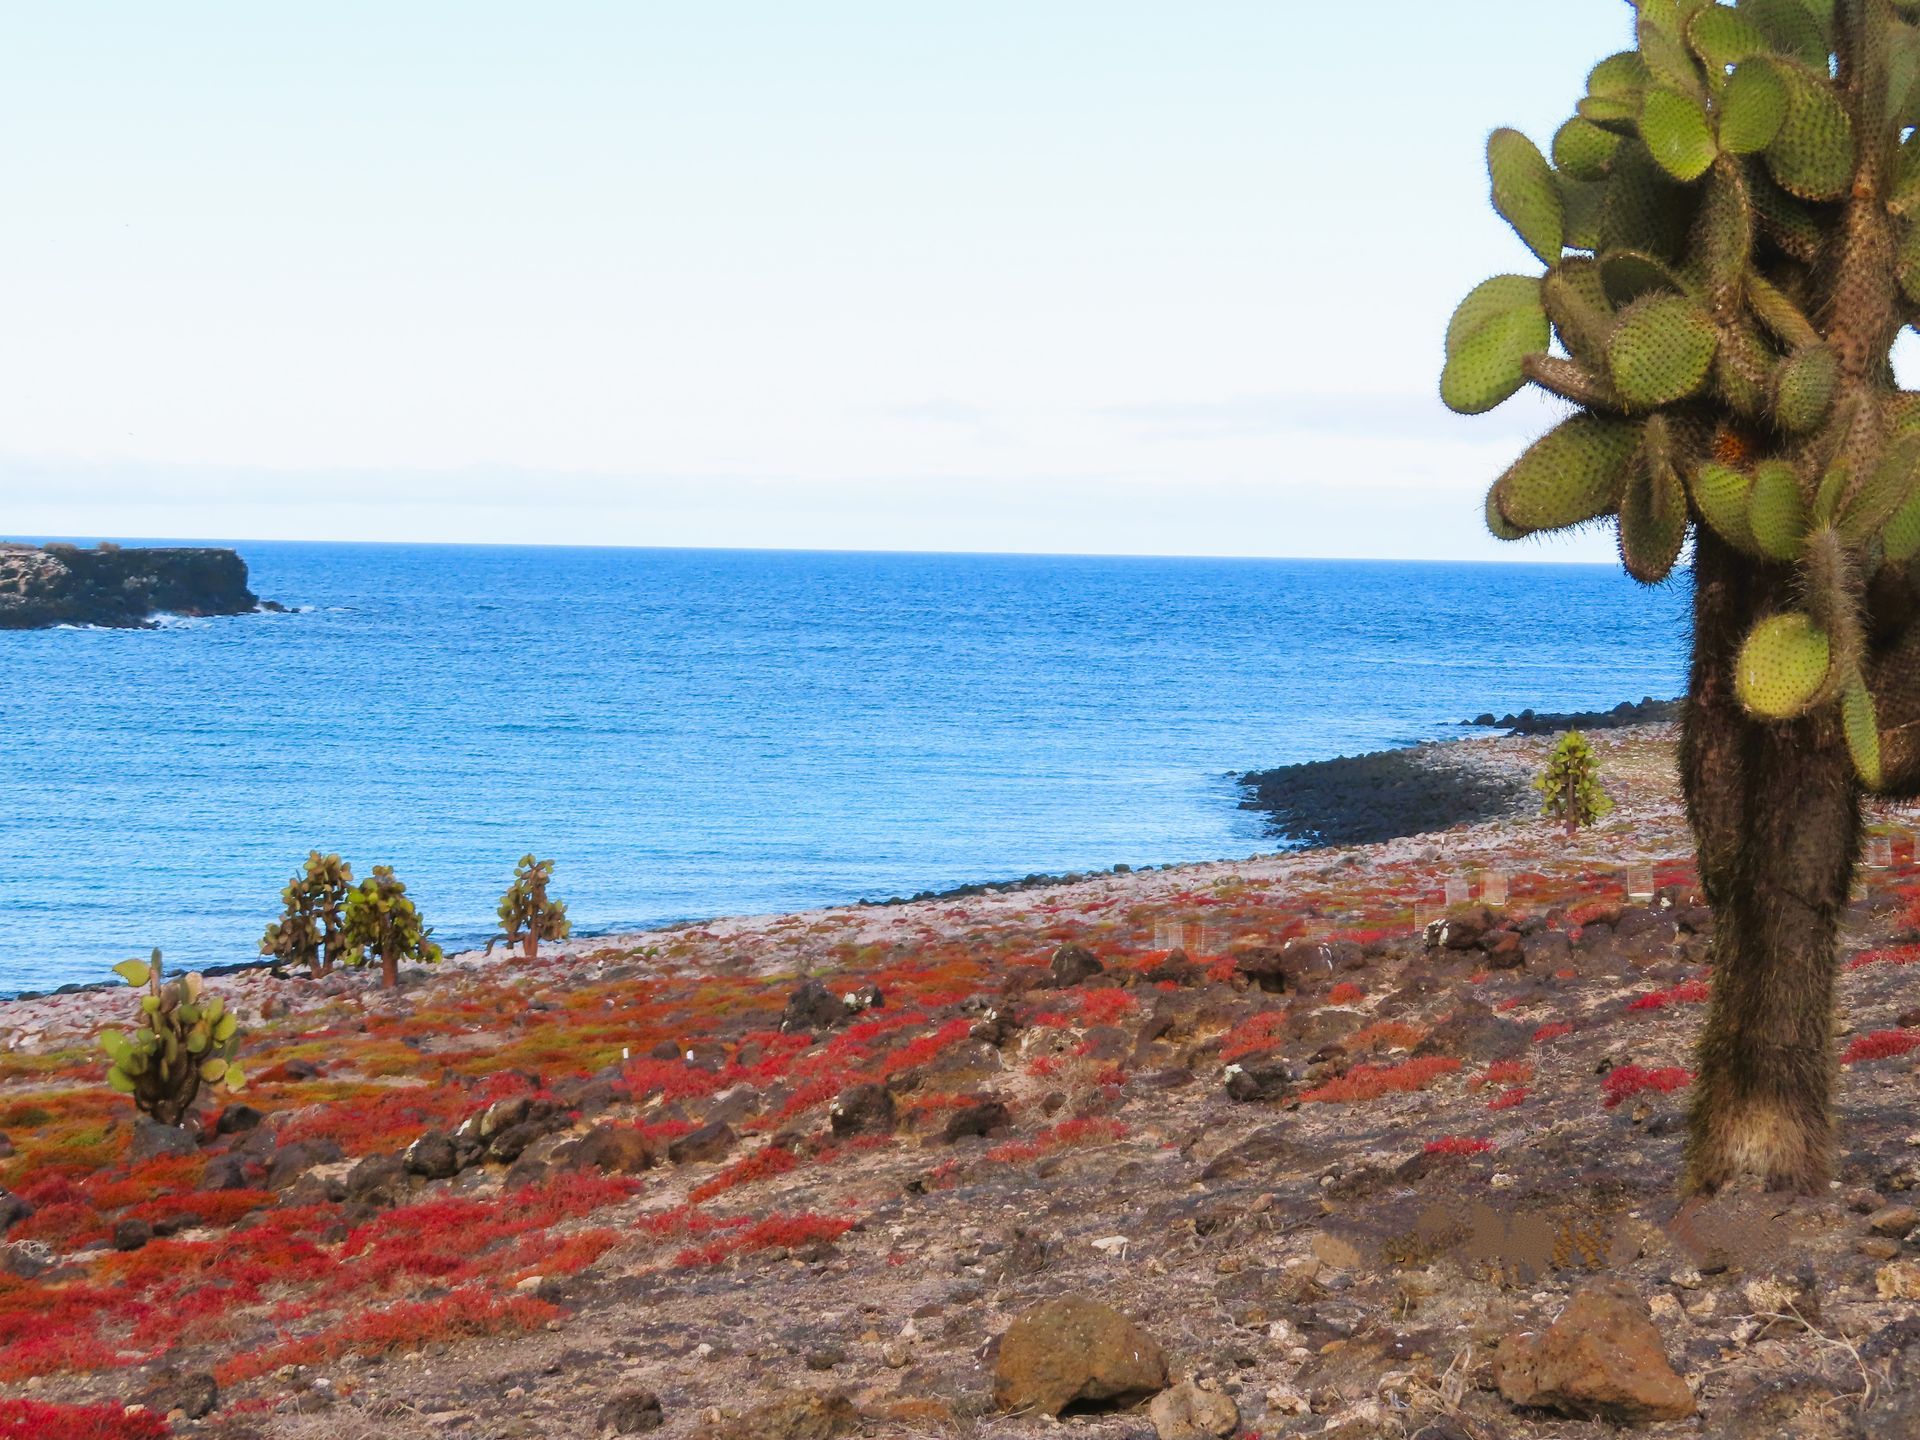 a cactus stands on a rocky beach near the ocean with red Vesuvius plant on the Galapagos Islands